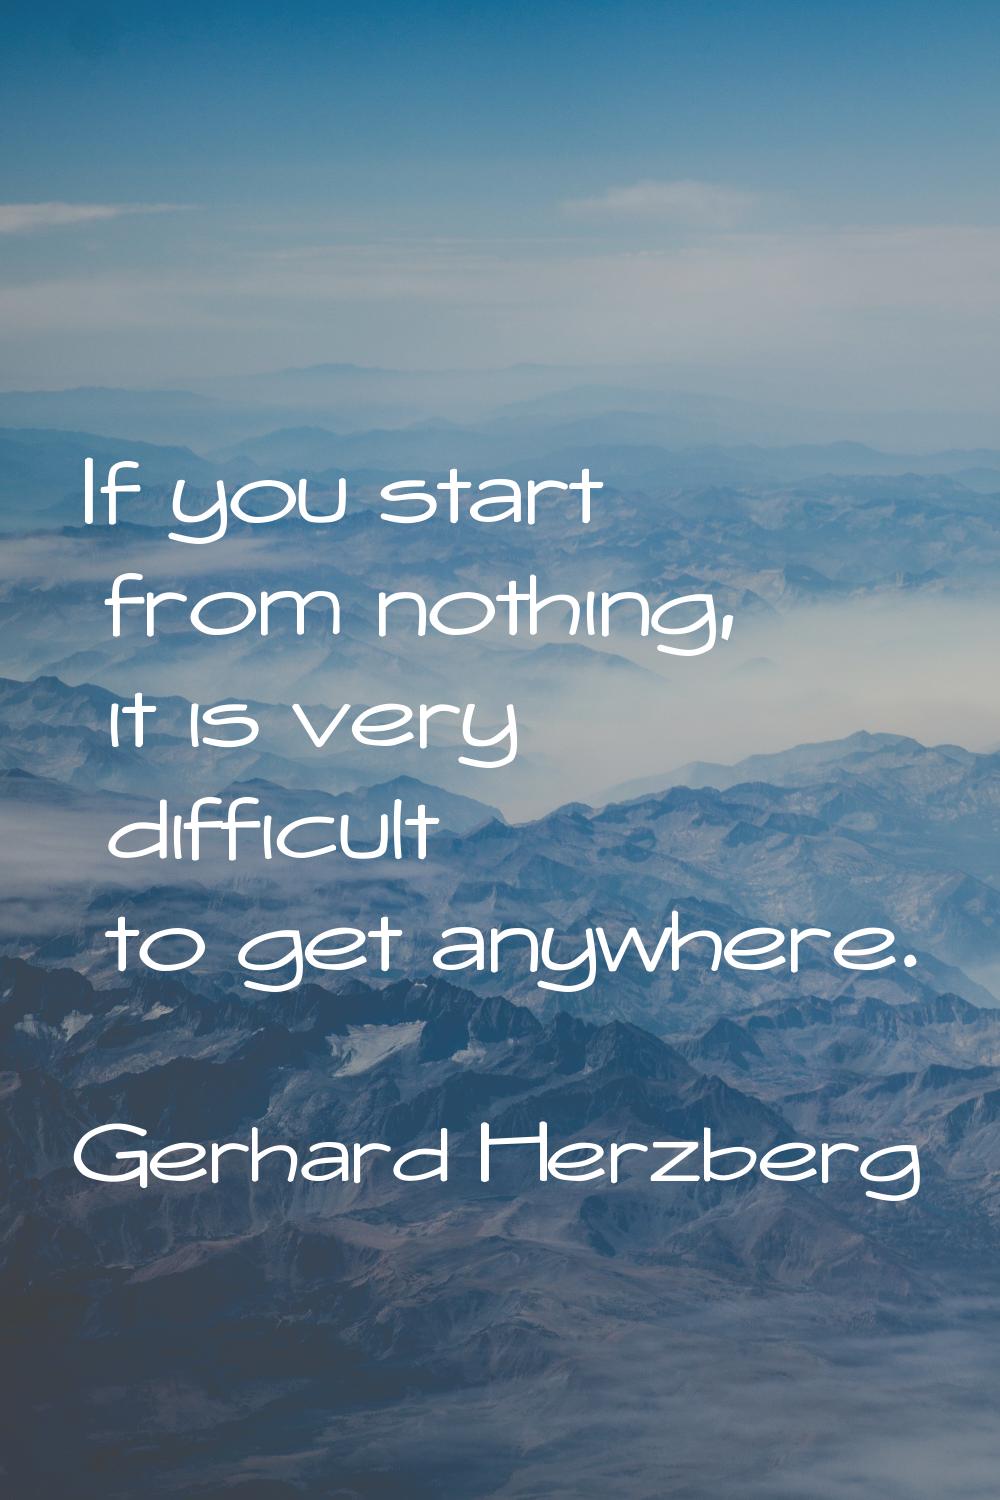 If you start from nothing, it is very difficult to get anywhere.